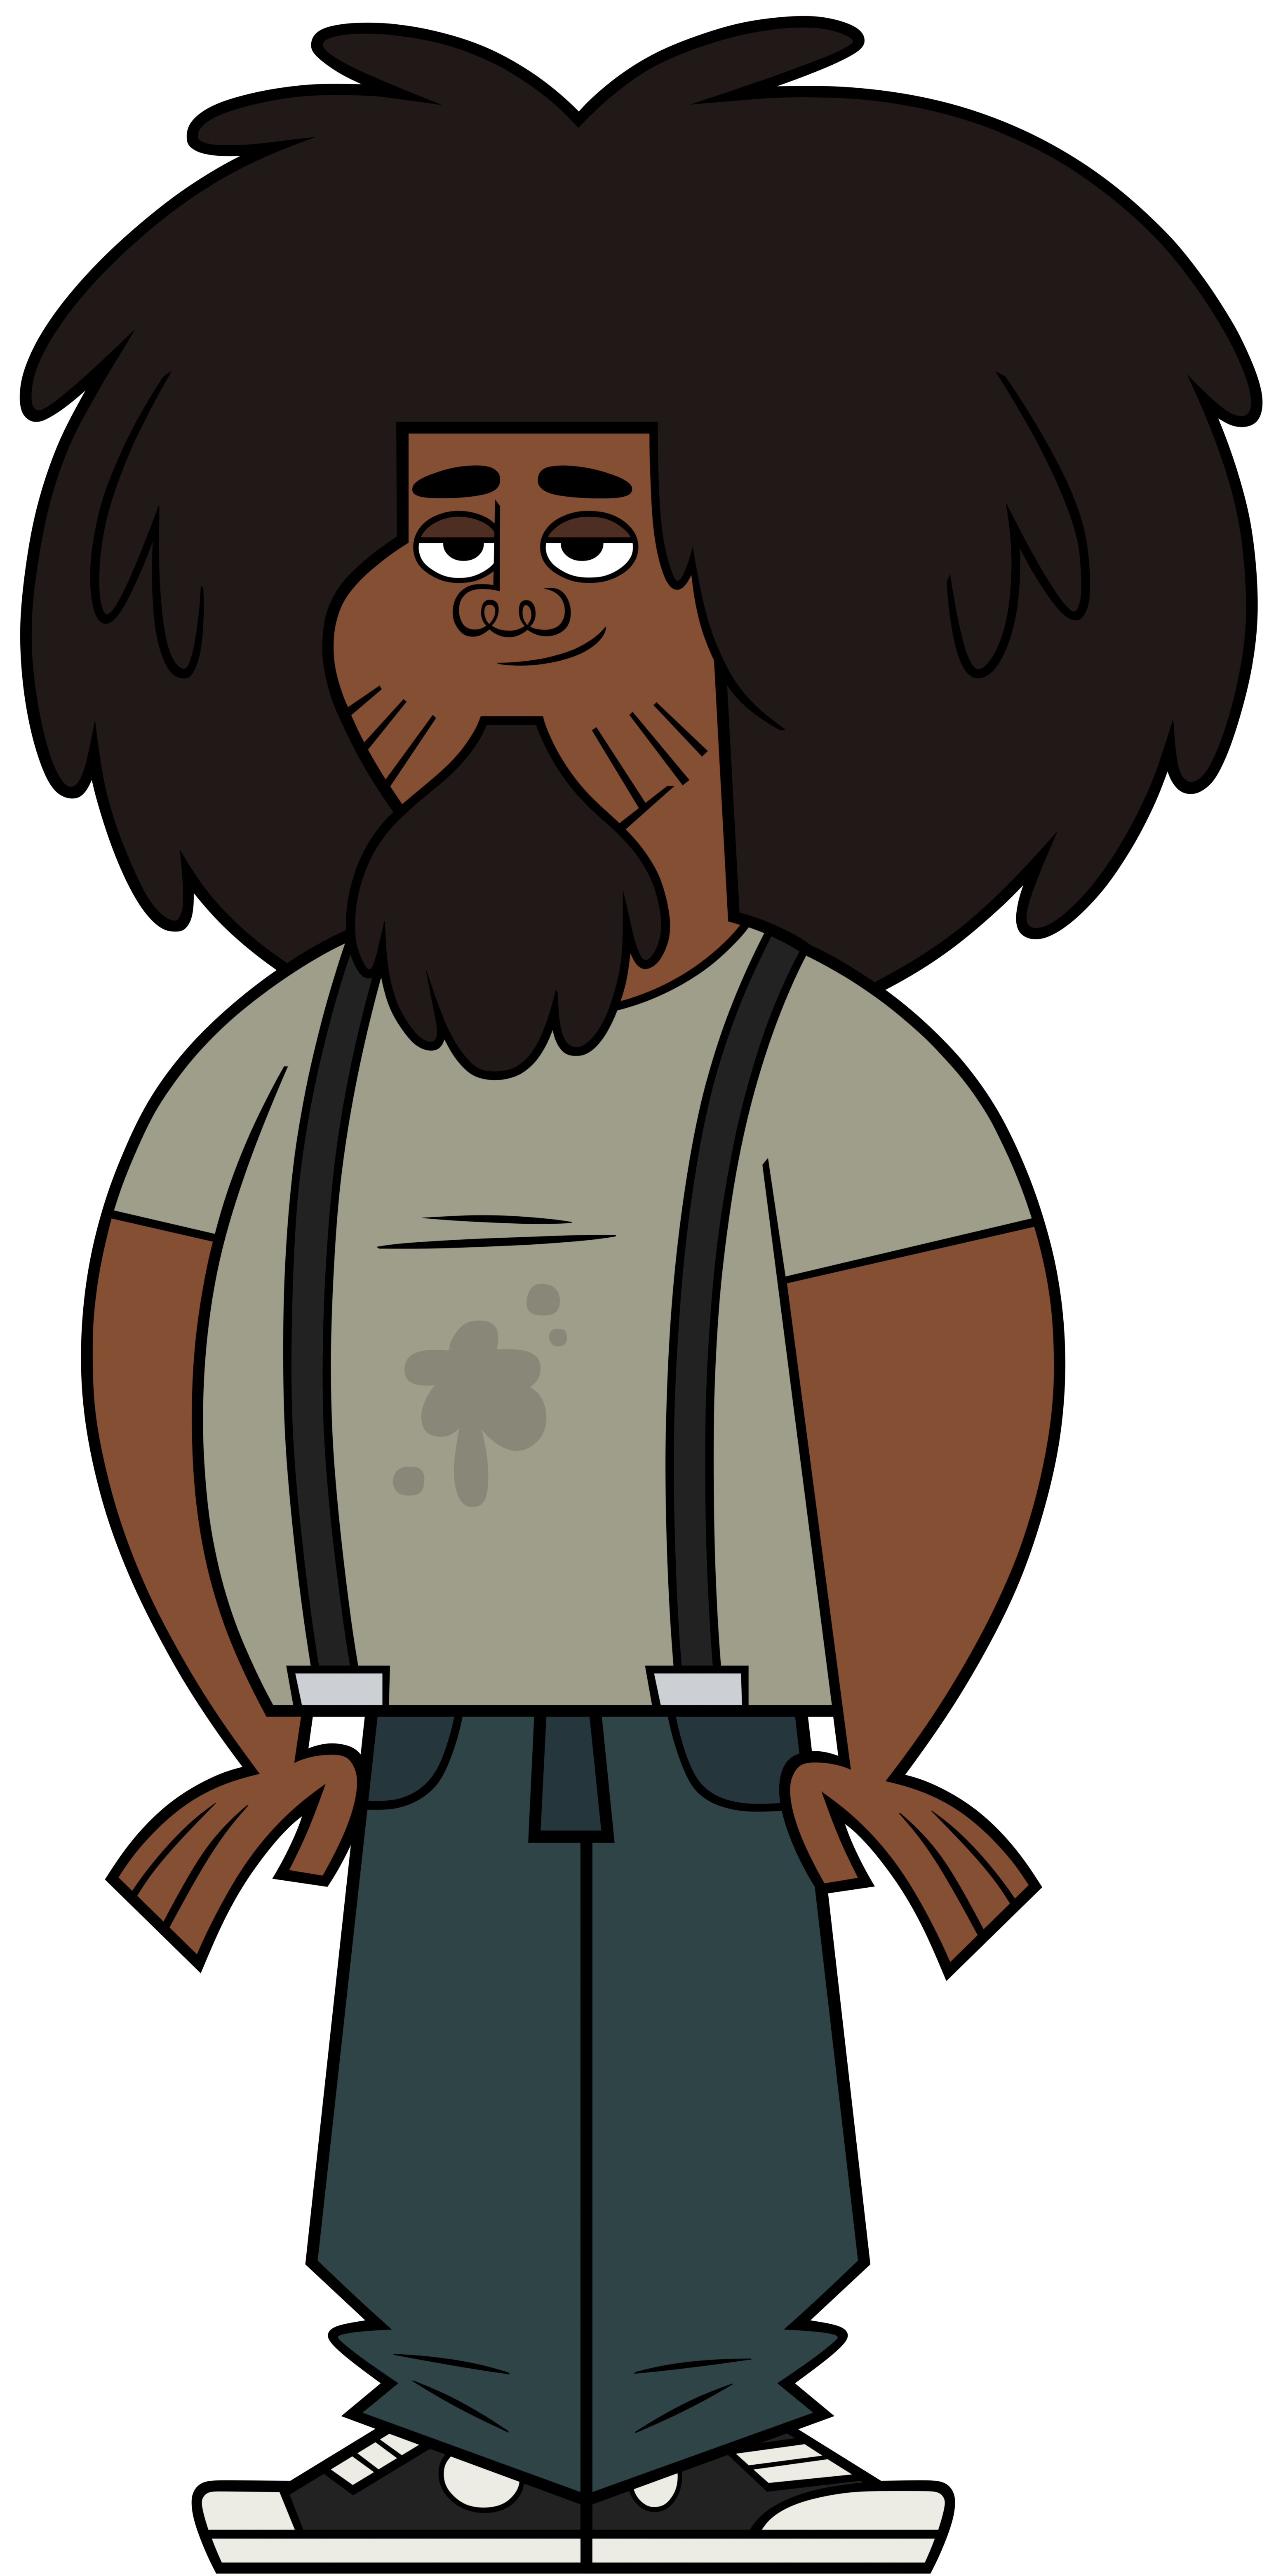 Total Drama Pahkitew Island Characters Quiz: Discover Your Personality -  ProProfs Quiz